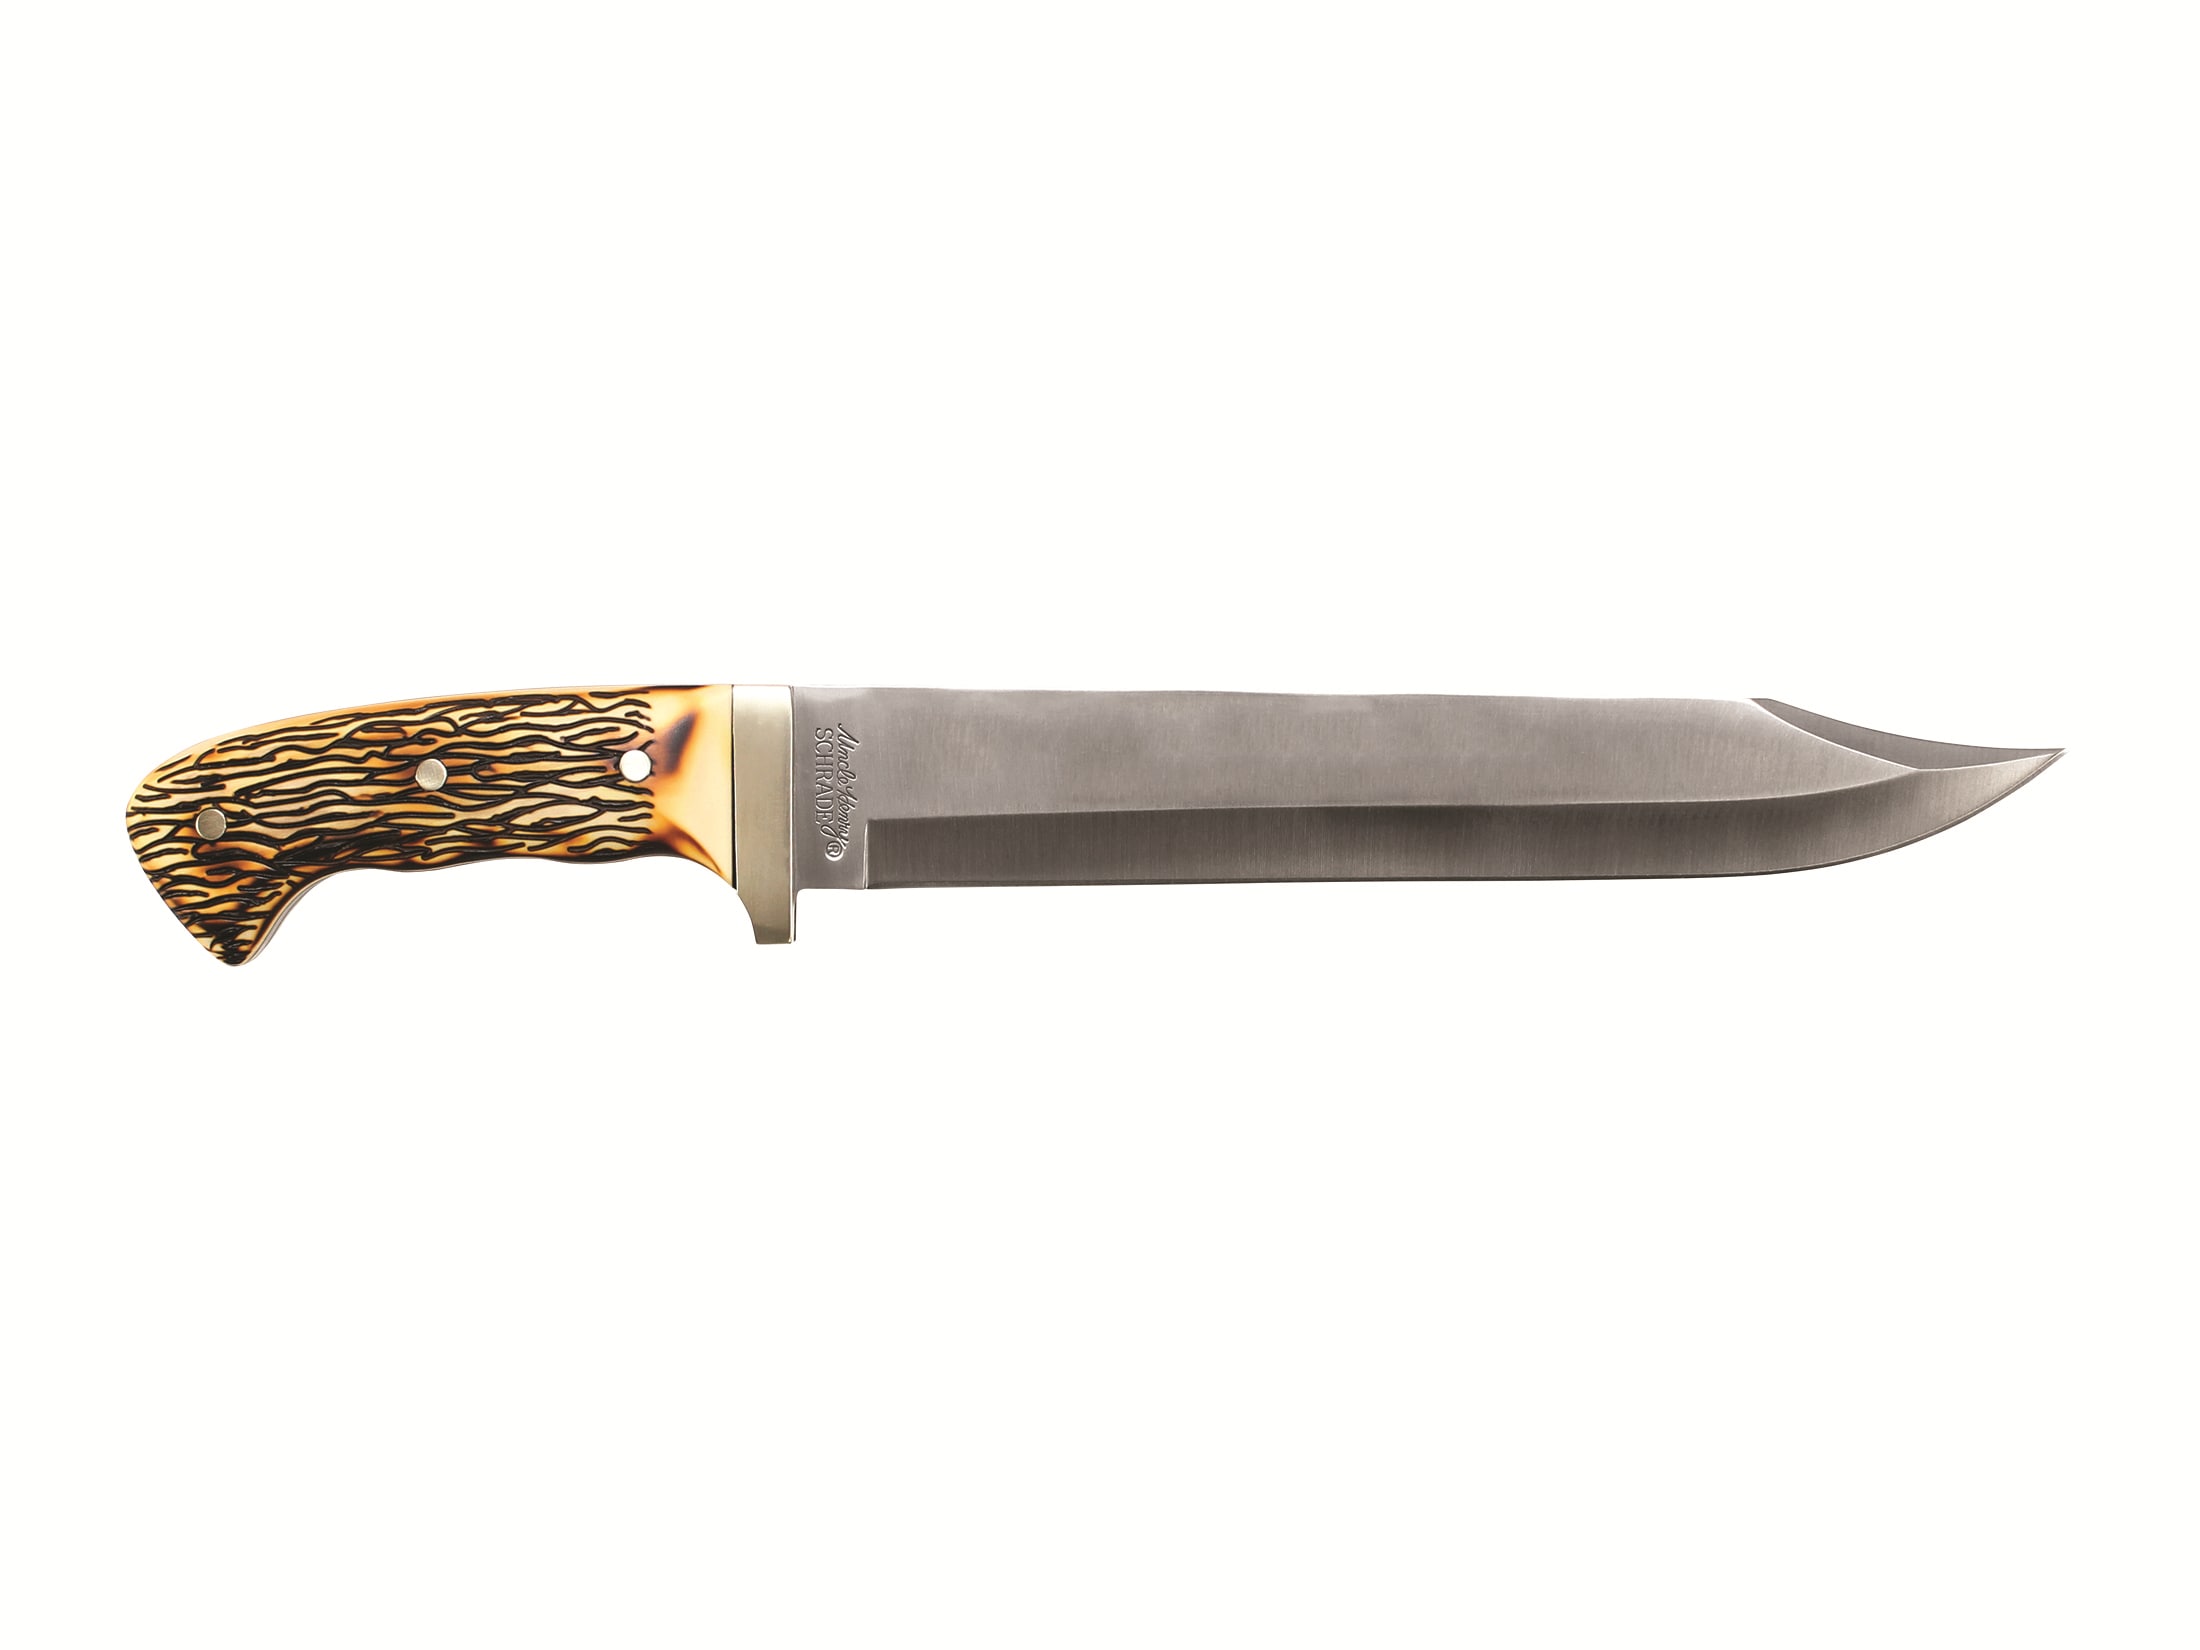 Uncle Henry Next Gen Staglon Full Tang Guthook Fixed Blade Knife